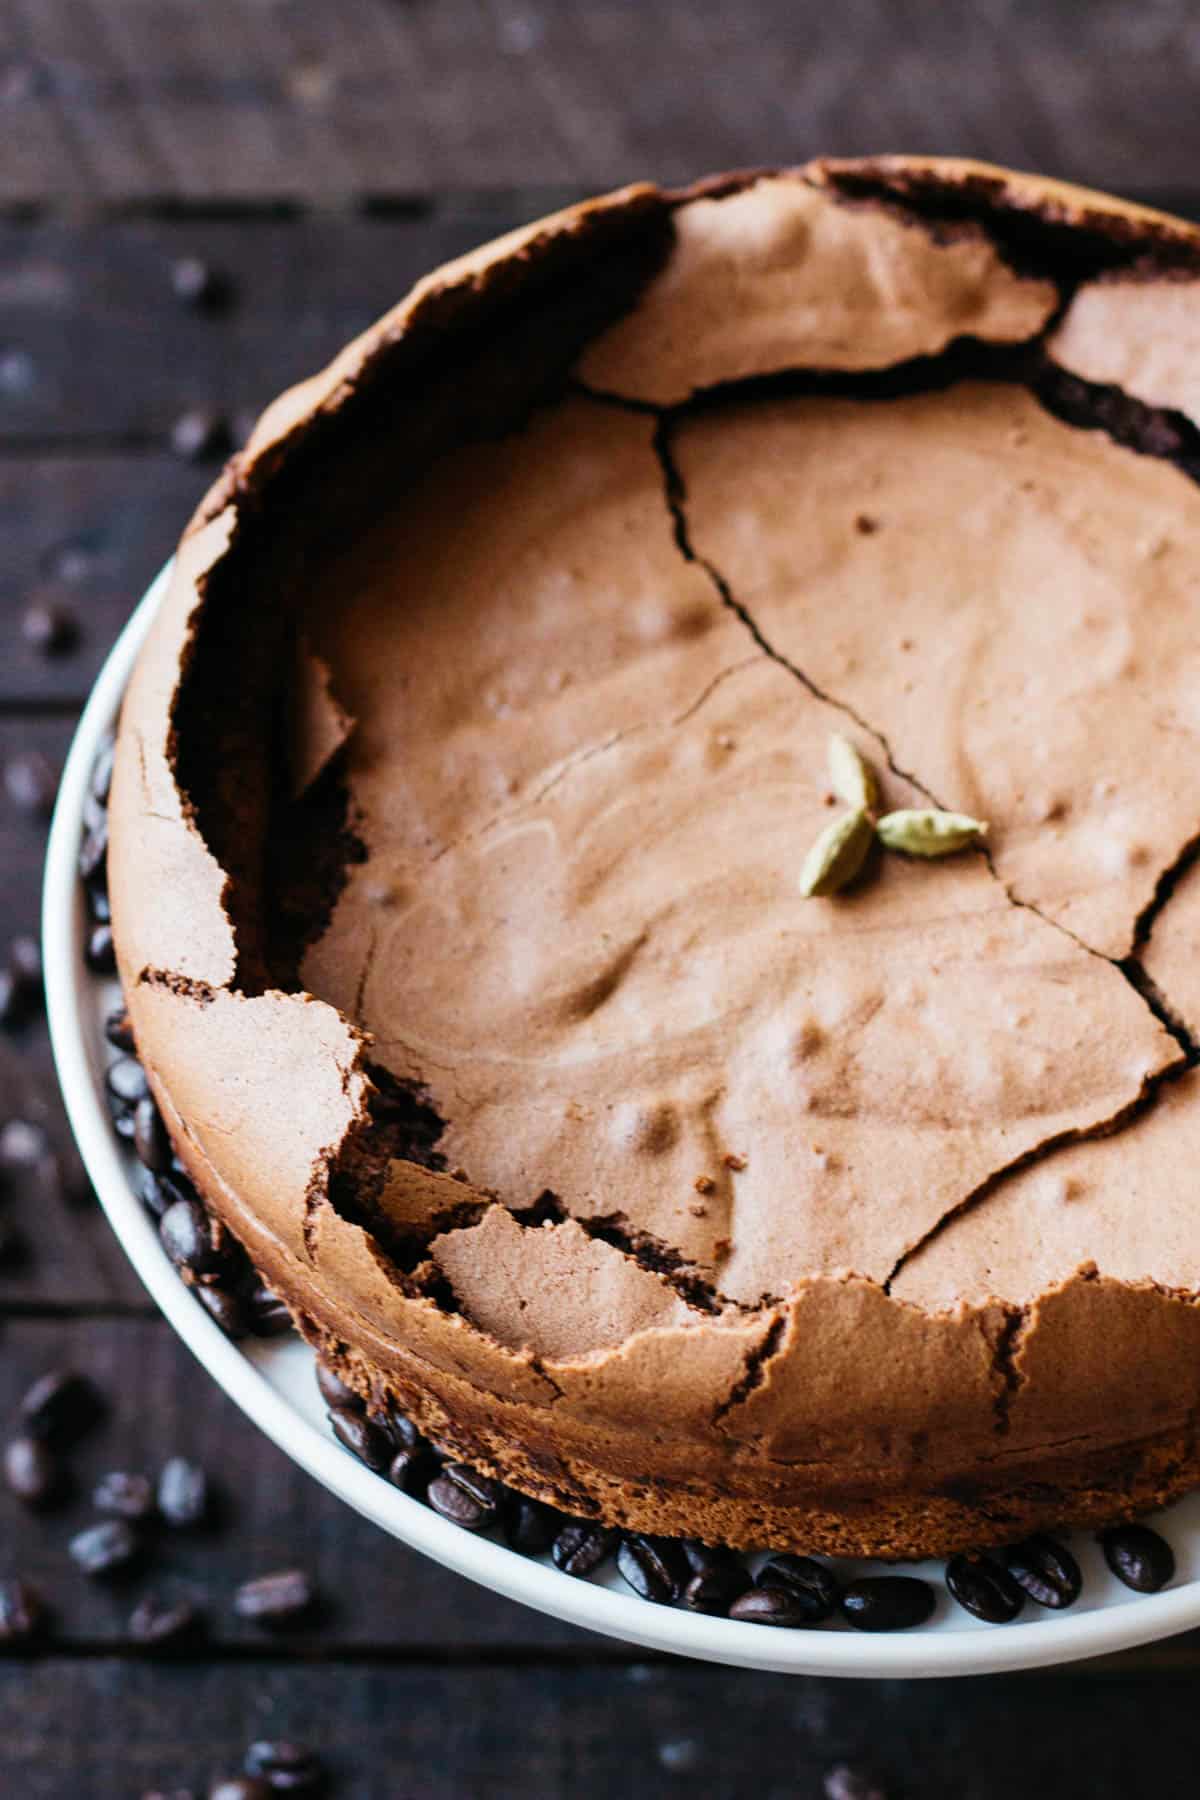 6-Ingredient Flourless Chocolate Cake - The Loopy Whisk